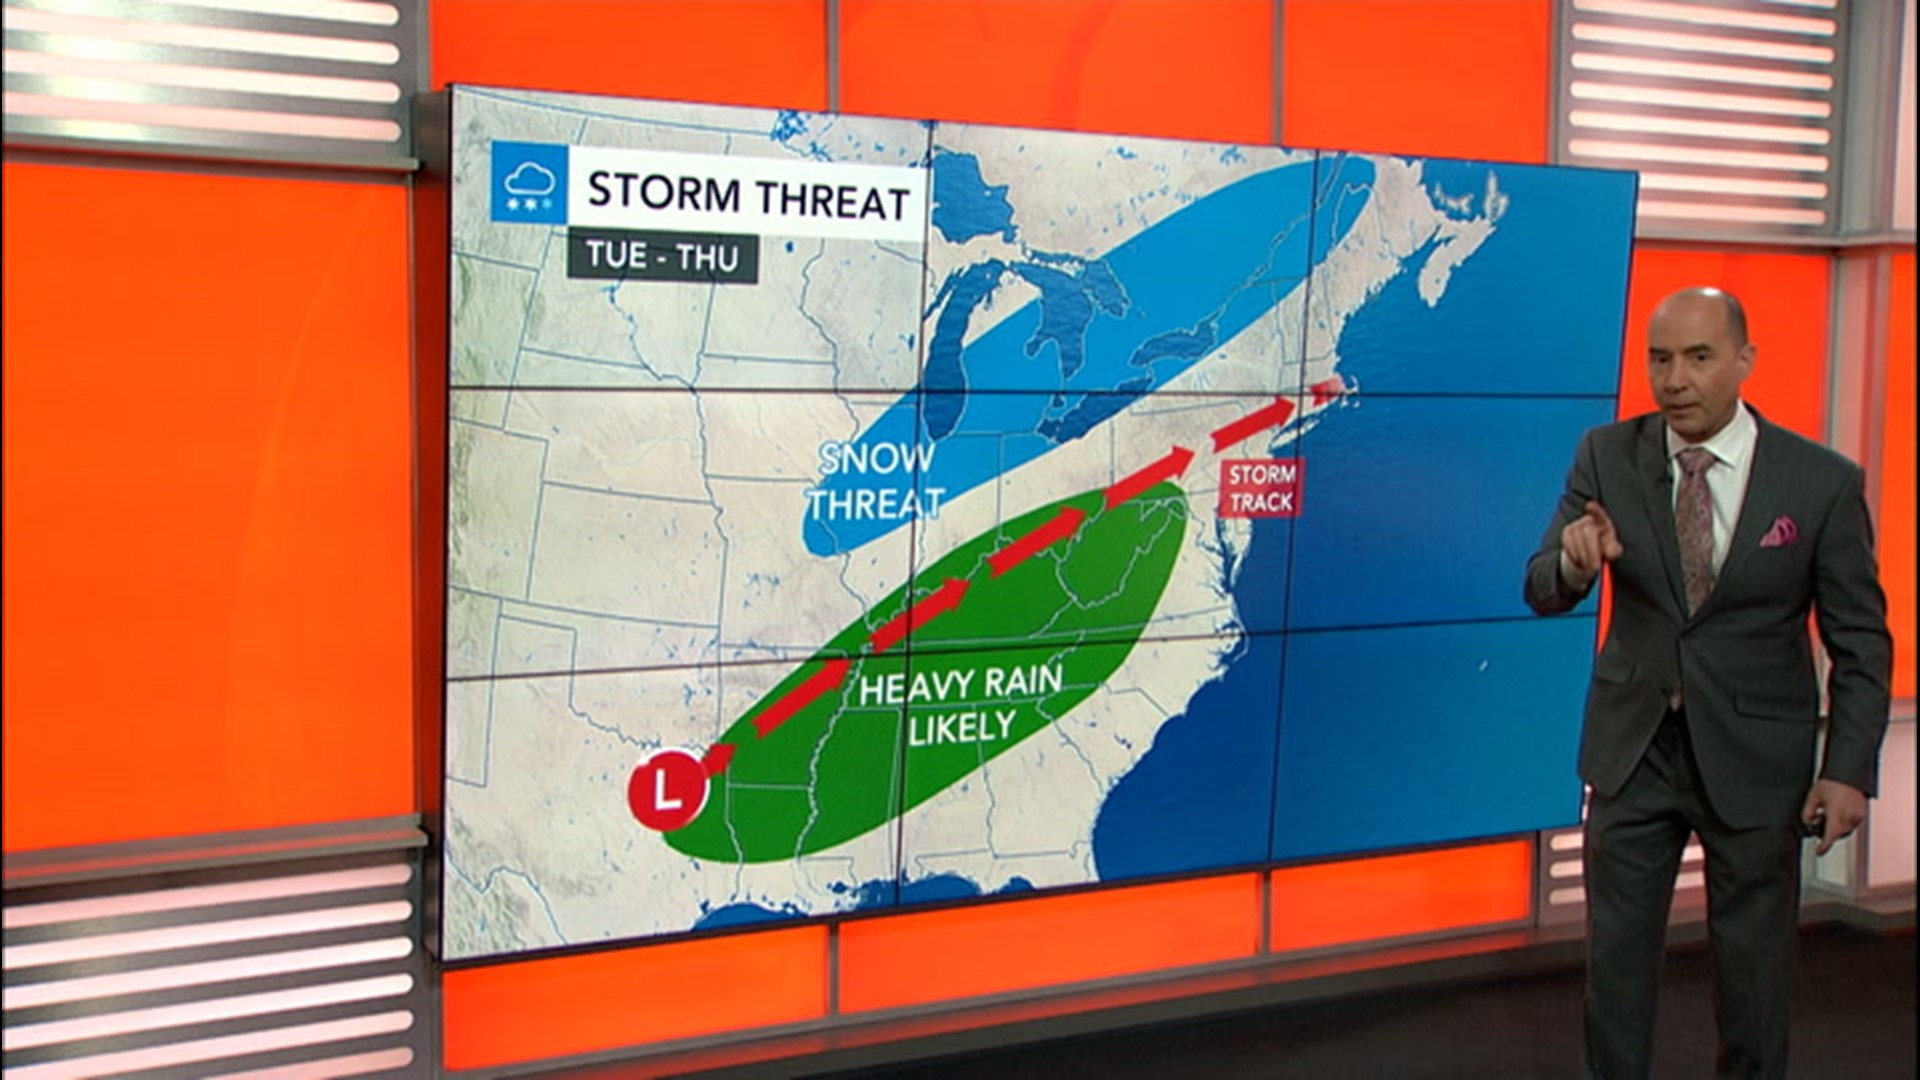 AccuWeather Chief Broadcast Meteorologist Bernie Rayno takes at look at the atmospheric setup for a storm that will produce rain, snow and severe storms across parts of the U.S.